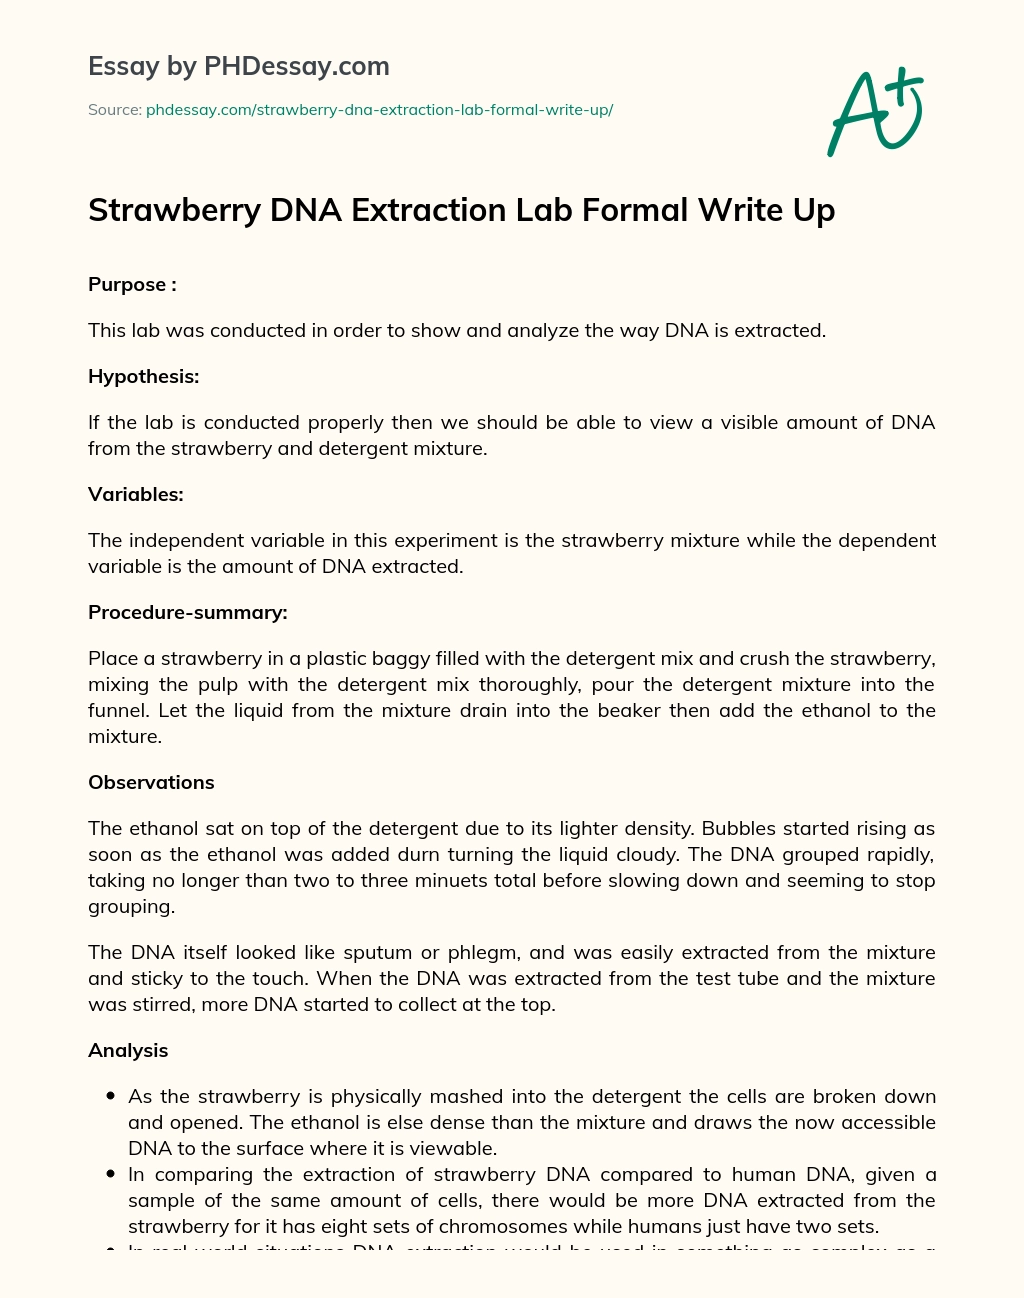 Strawberry DNA Extraction Lab Formal Write Up essay